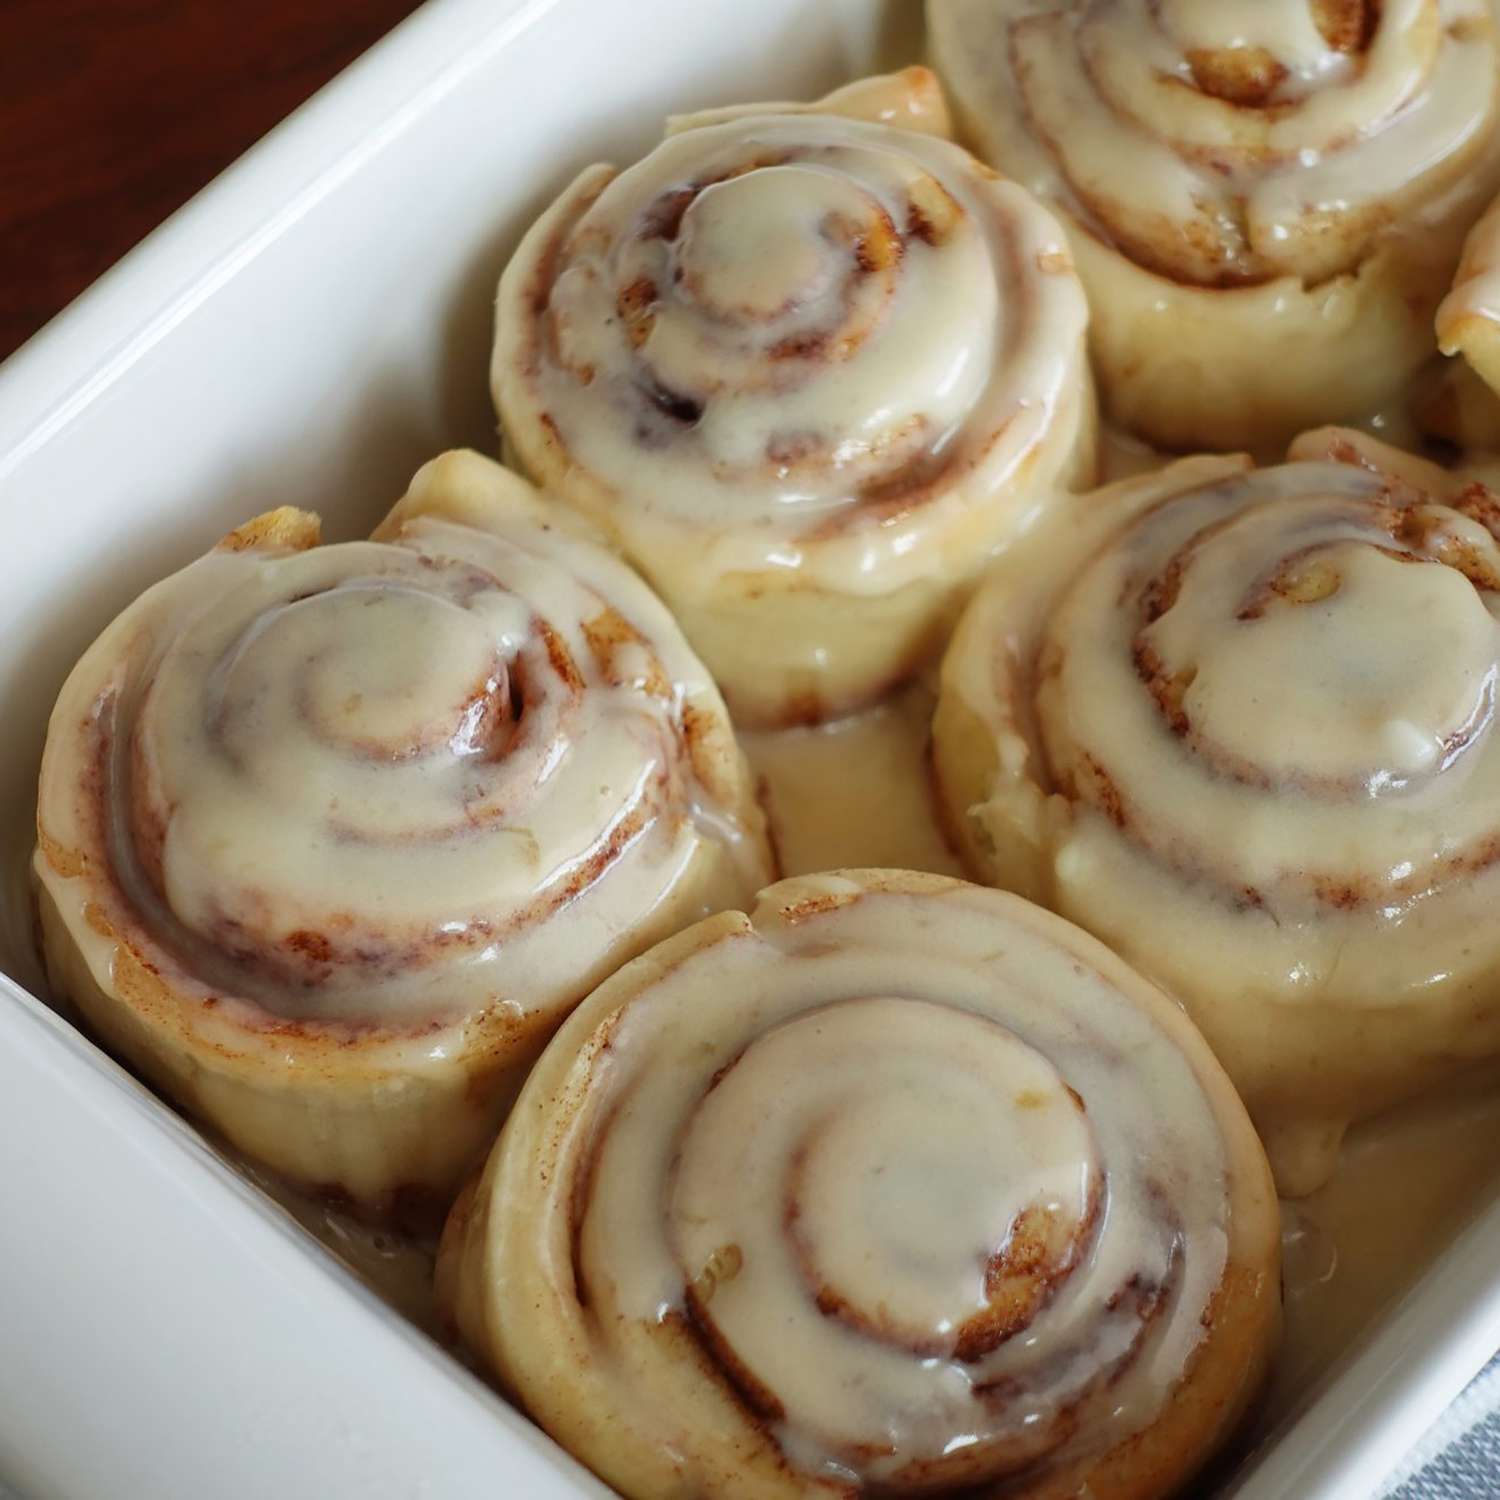 A baking dish full of large cinnamon rolls coated with icing.